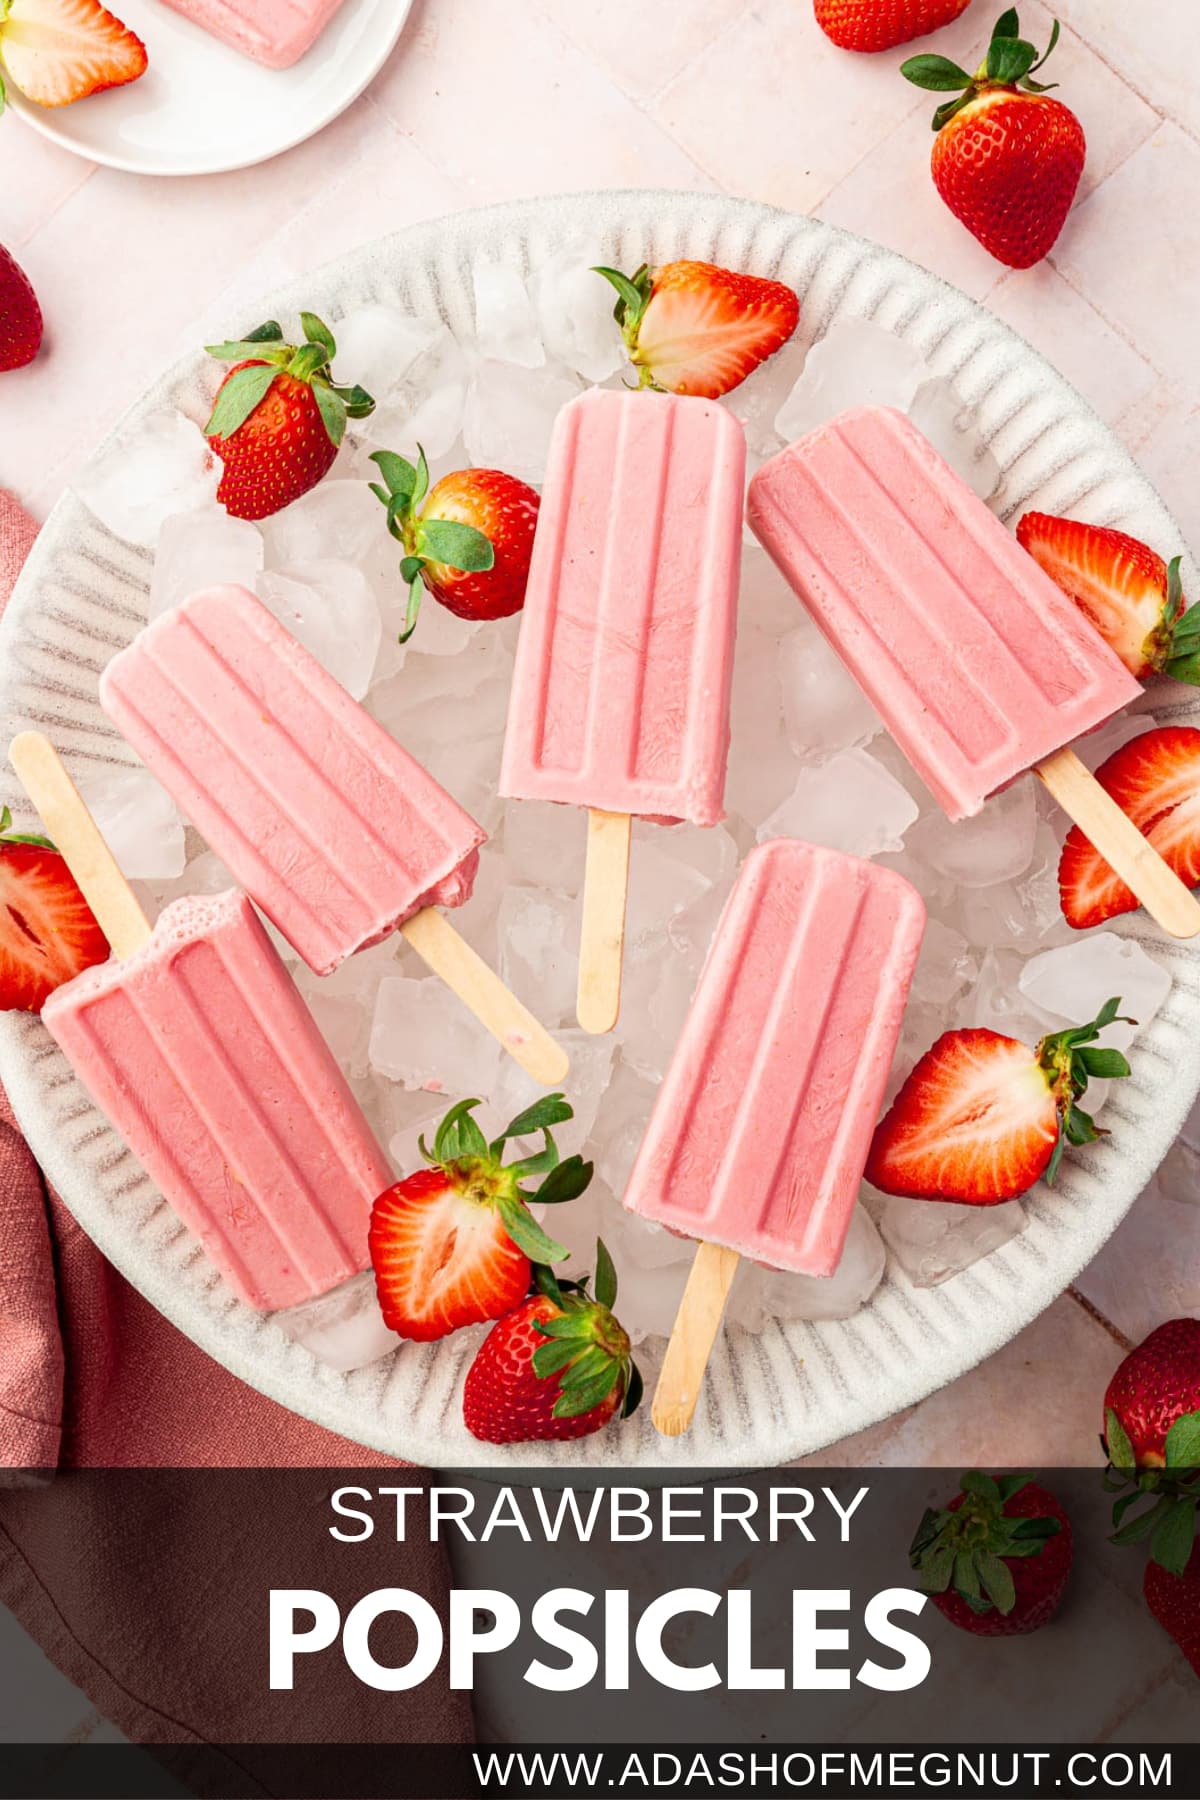 A large bowl filled with ice cubes and topped with strawberry yogurt popsicles with fresh strawberry halves surrounding the popsicles.